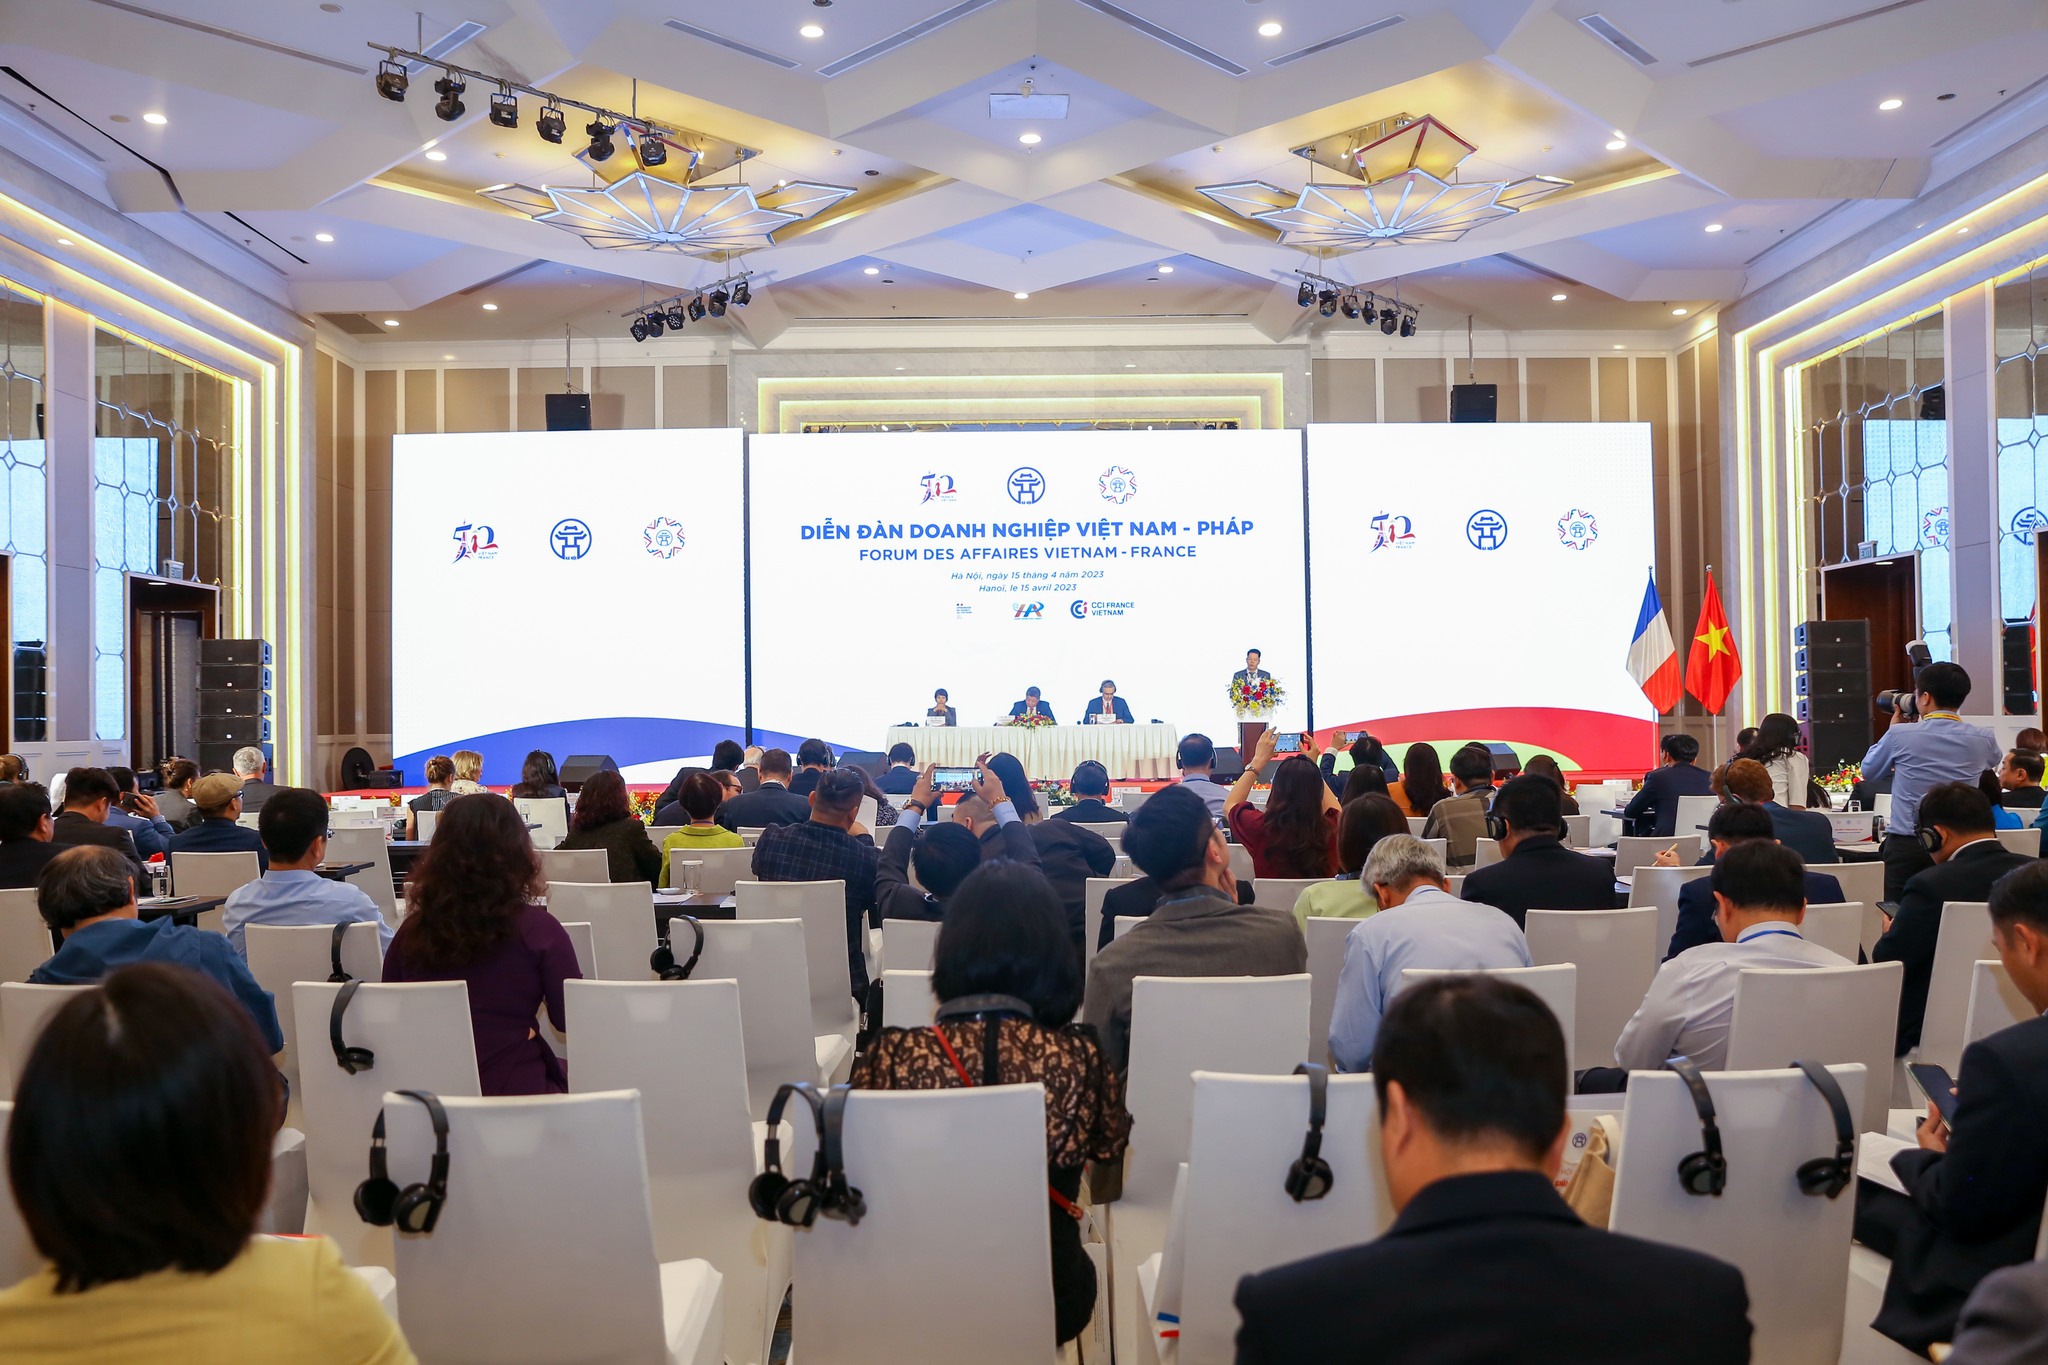 CMC attends the Vietnam - France Business Forum: Connection for IT investment